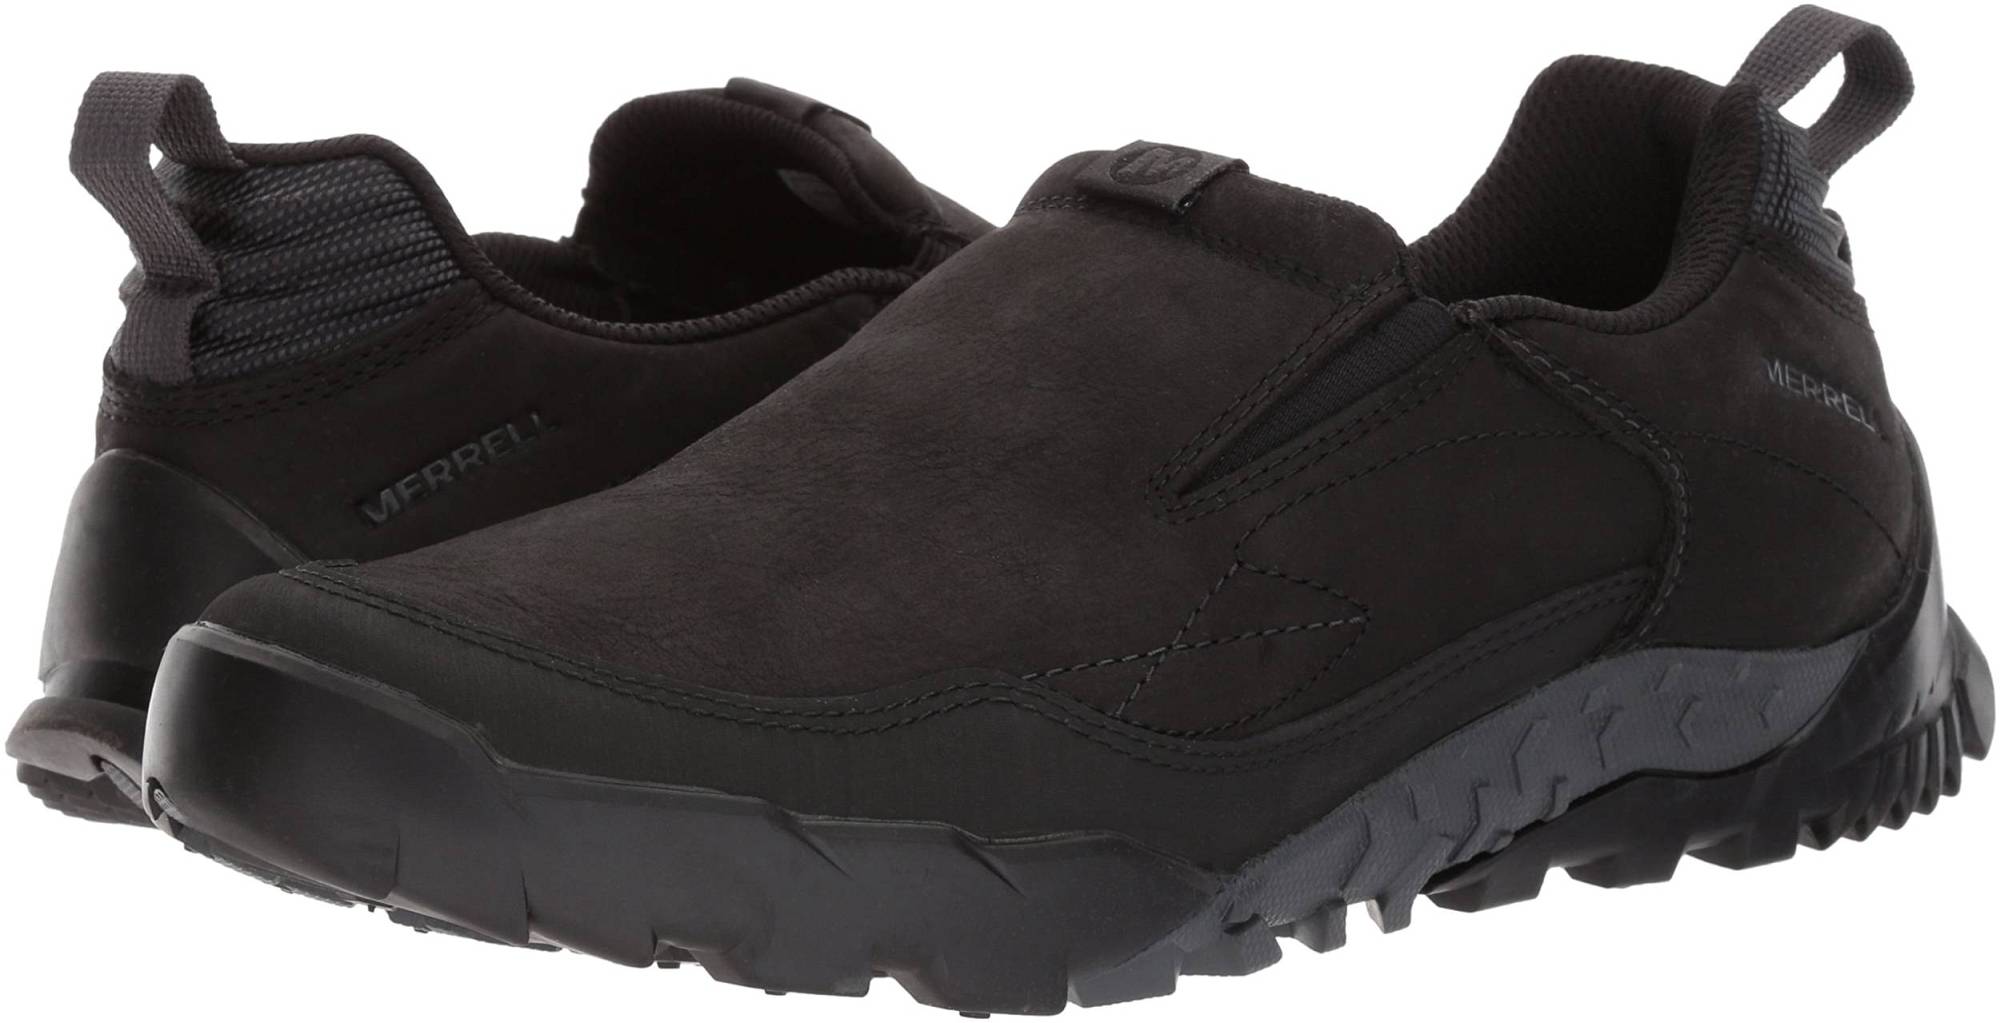 Merrell Annex Trak Moc – Shoes Reviews & Reasons To Buy